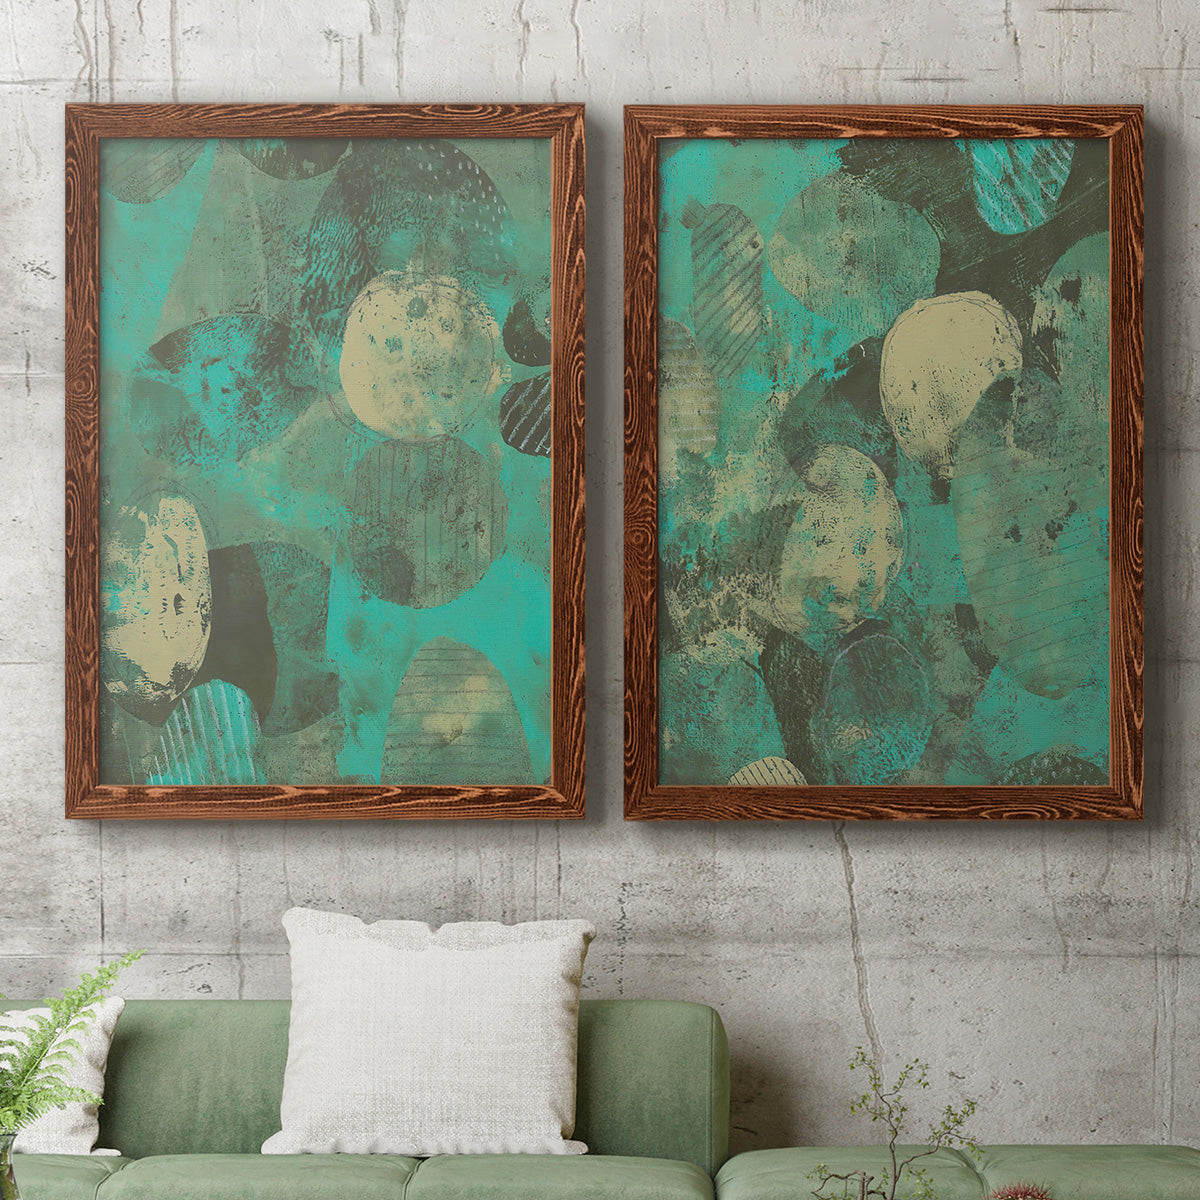 Minty Green Orbs I - Premium Framed Canvas 2 Piece Set - Ready to Hang